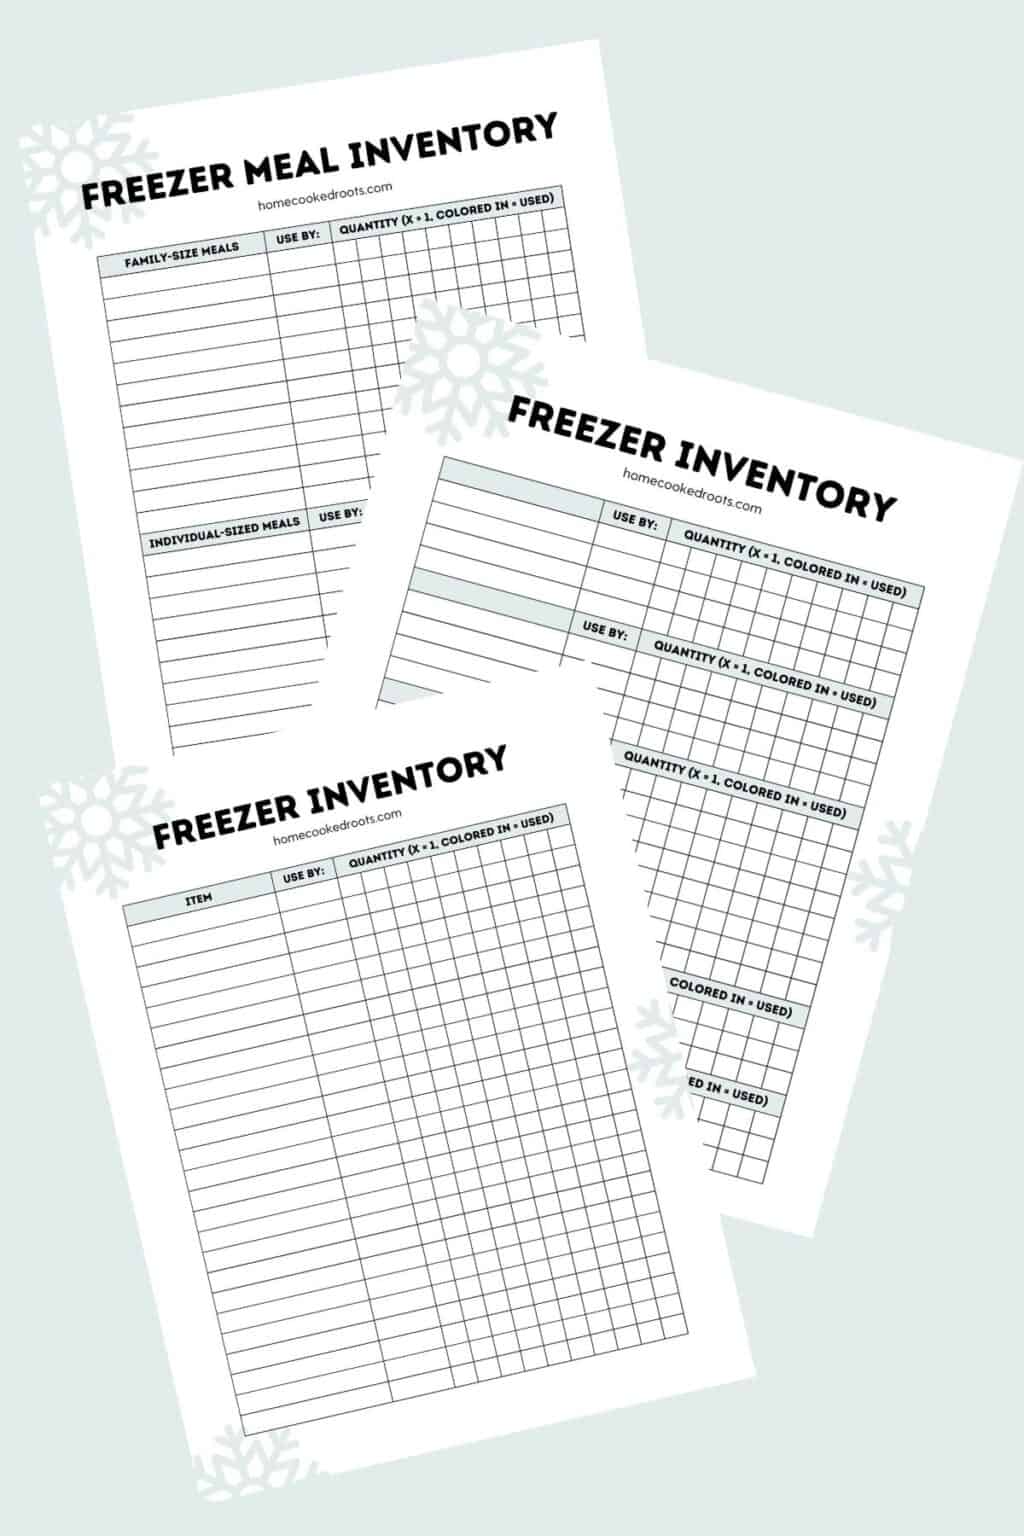 Free Printable Freezer Inventory Sheets - Home-Cooked Roots